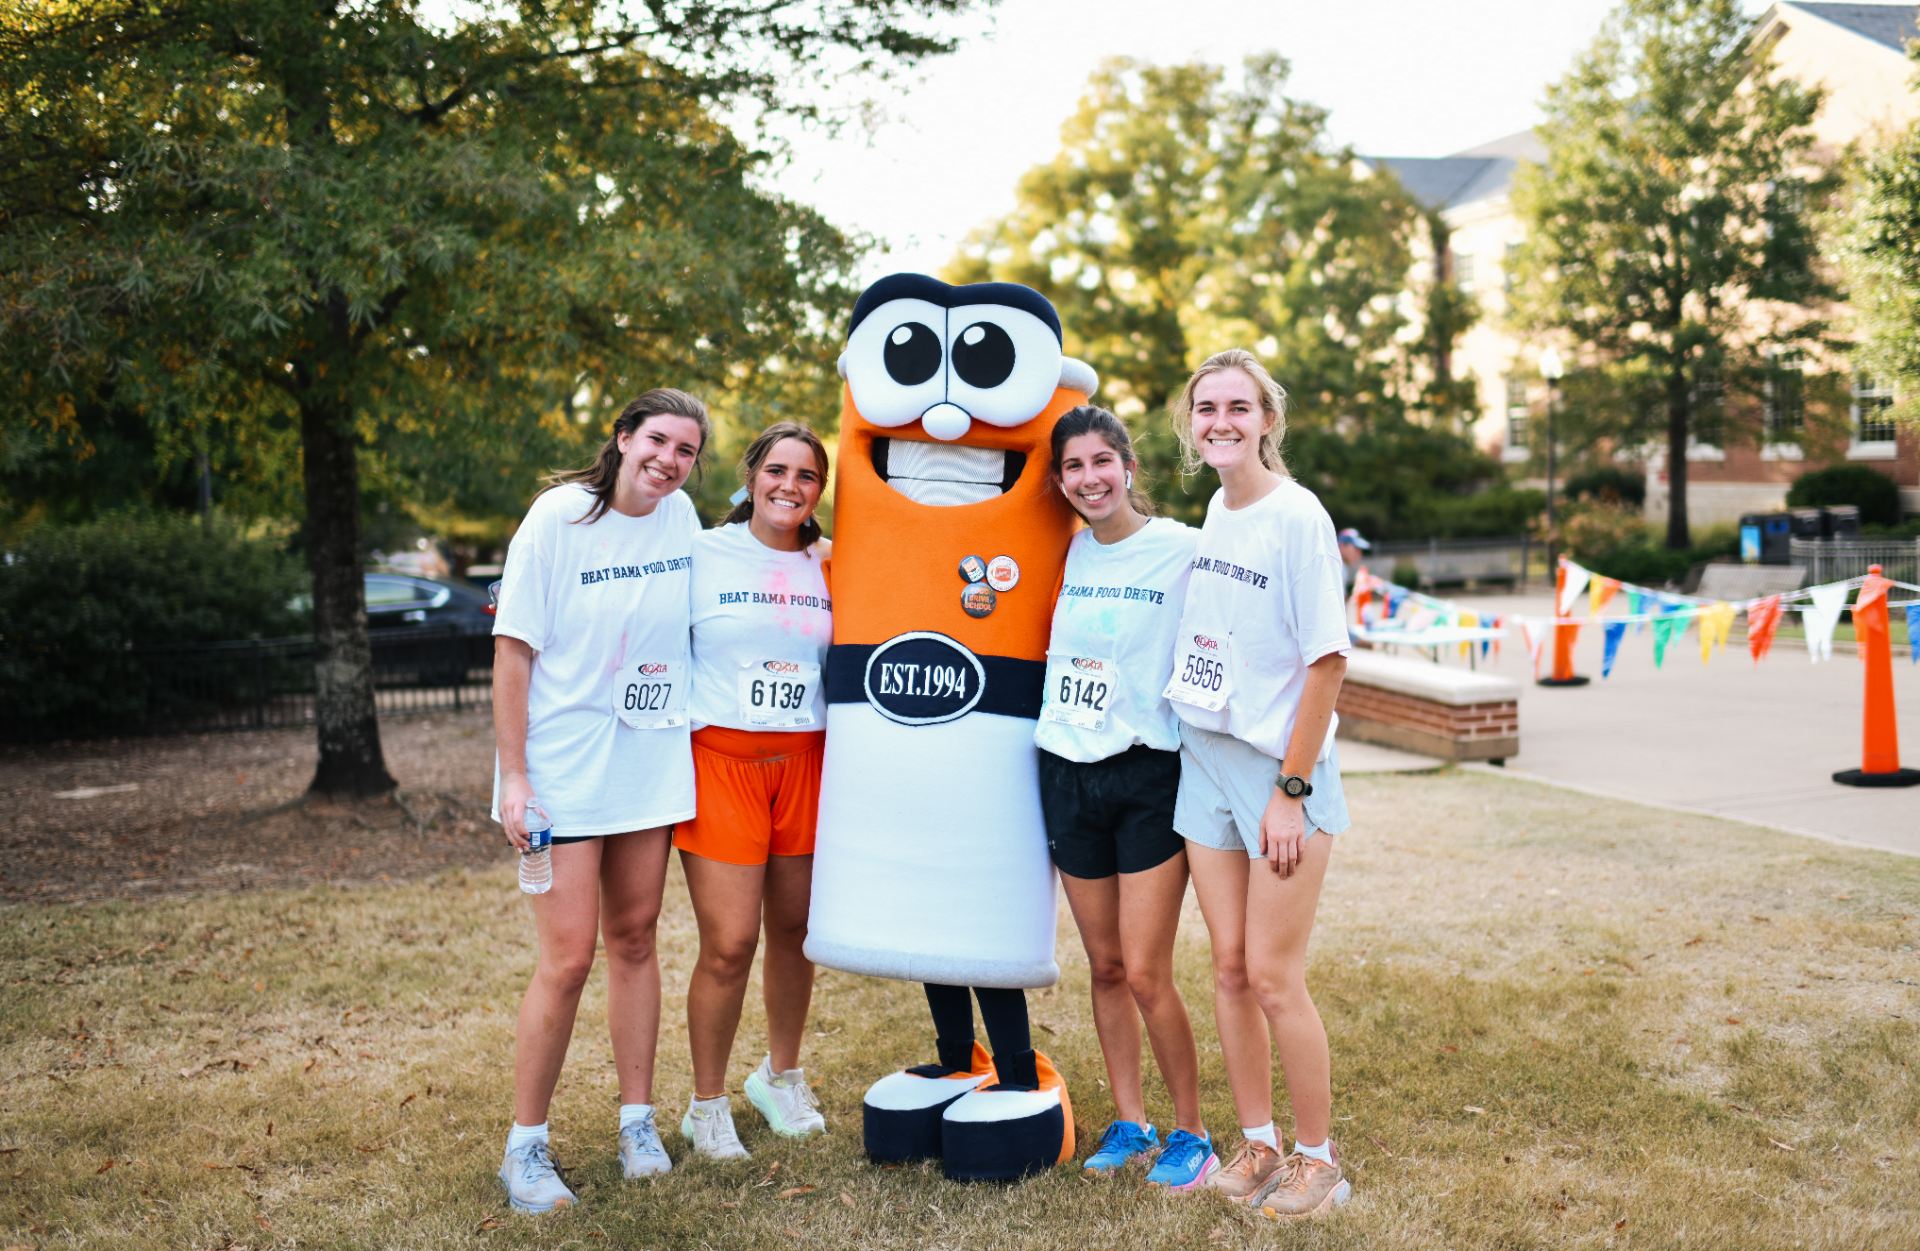 Students pose with the Beat Bama Food Drive Mascot, Canny, at the BBFD 5-K Race